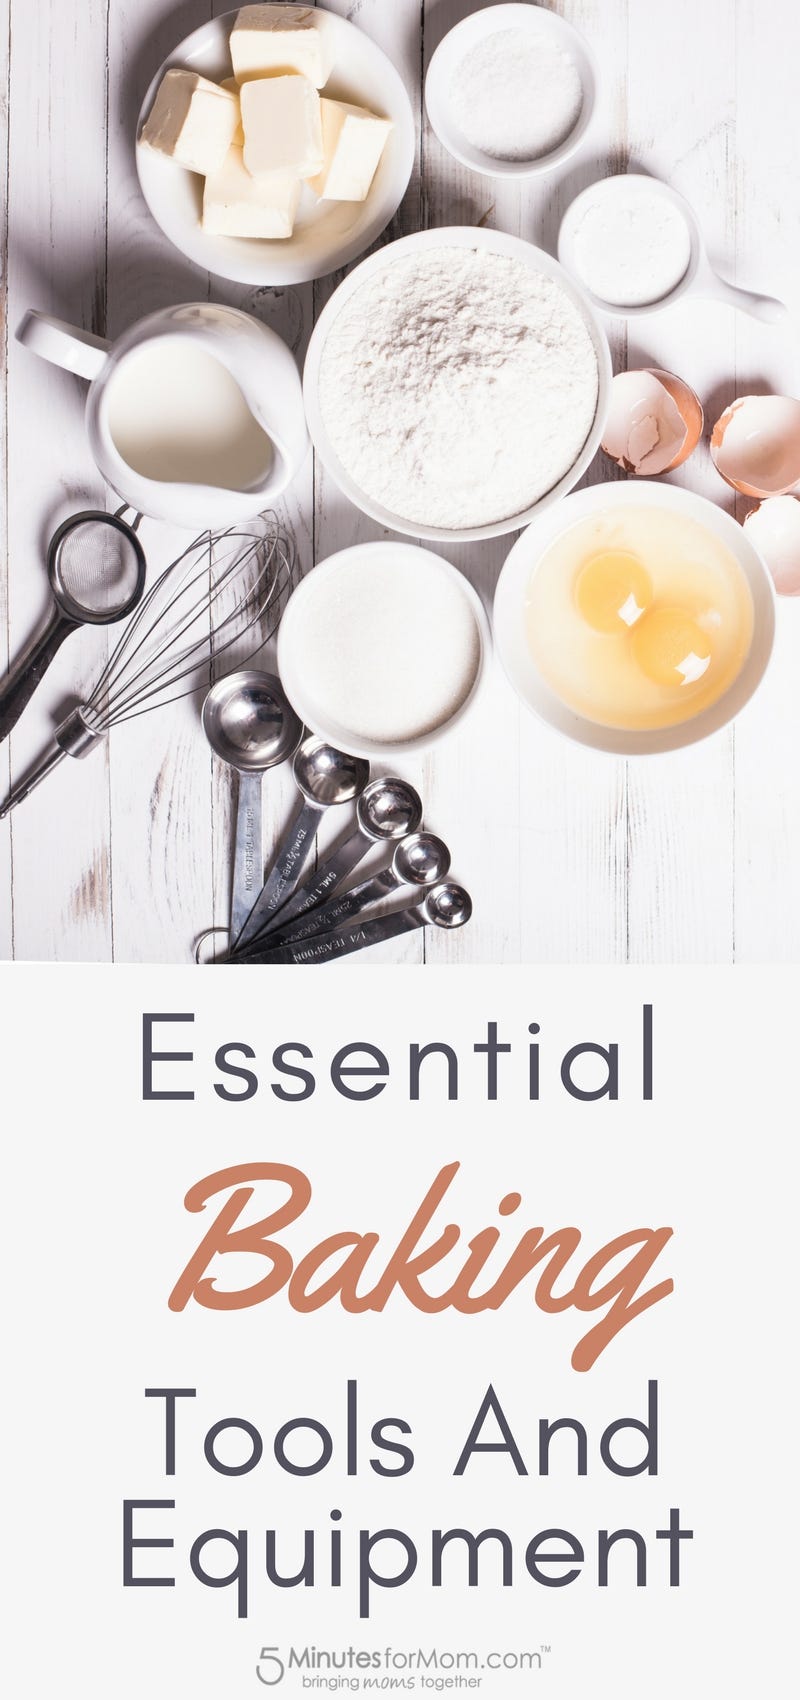 Essential Baking Tools and Equipment - Must Have Tools for Bakers